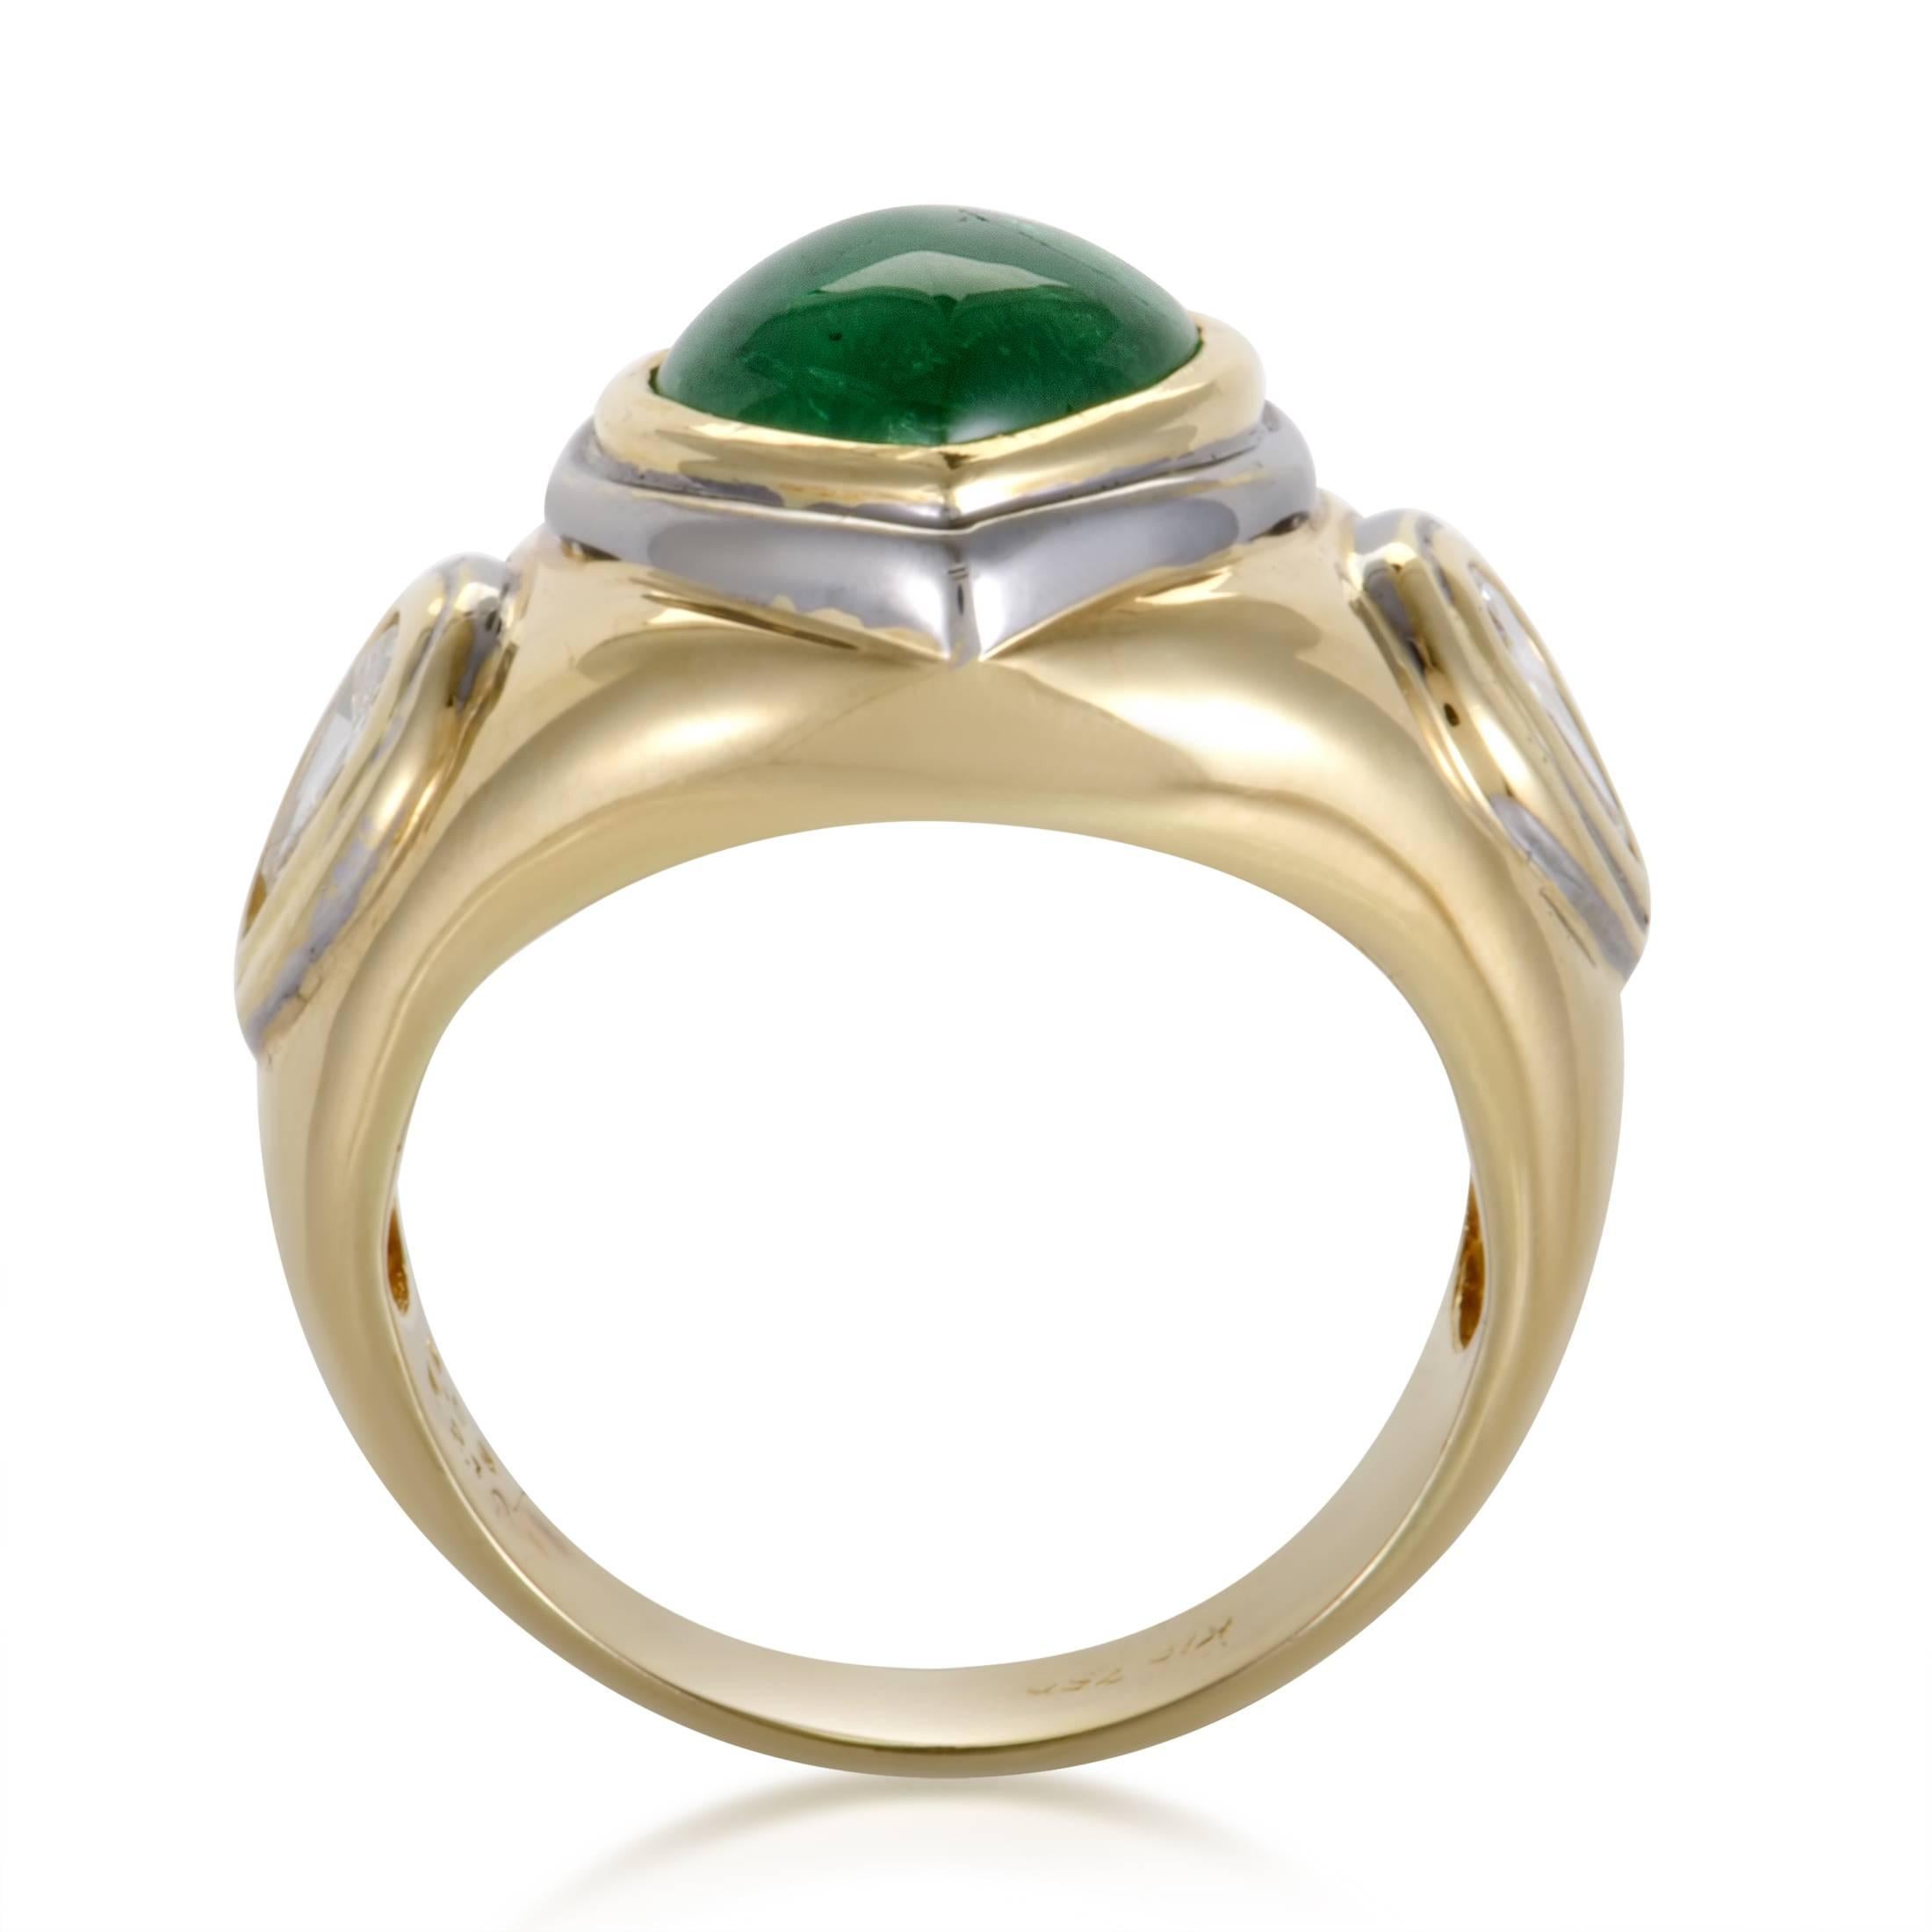 Made of a prestigious blend of 18K yellow and white gold, this marvelous ring boasts a gracefully smooth shape perfectly followed by the nifty emerald weighing 2.10 carats as well as the glistening diamonds amounting to 0.63ct for an adorable